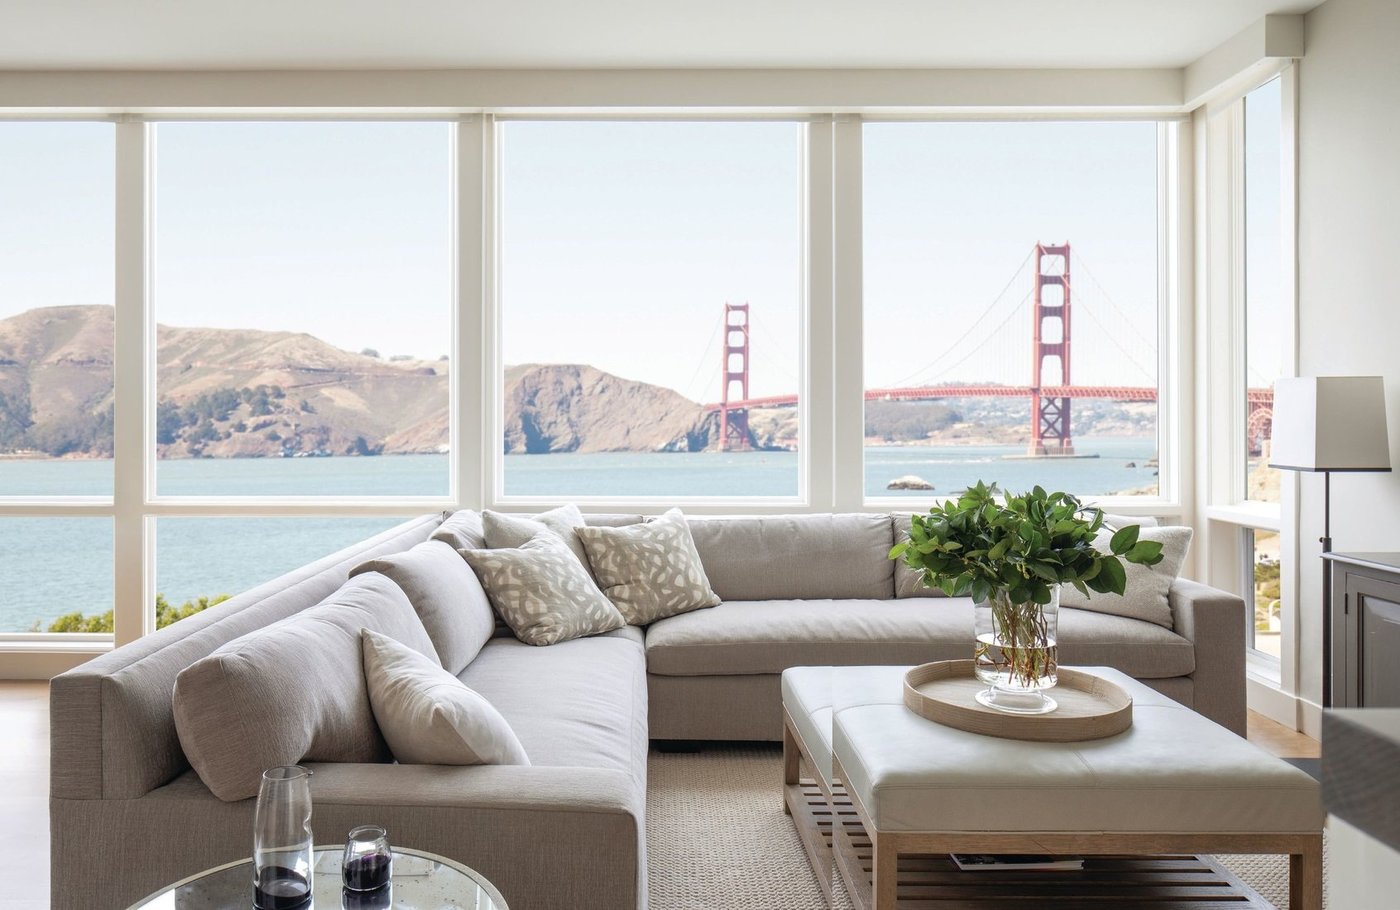 The Sea Cliff home offers stunning views from every room PHOTOGRAPHED BY BESS FRIDAY